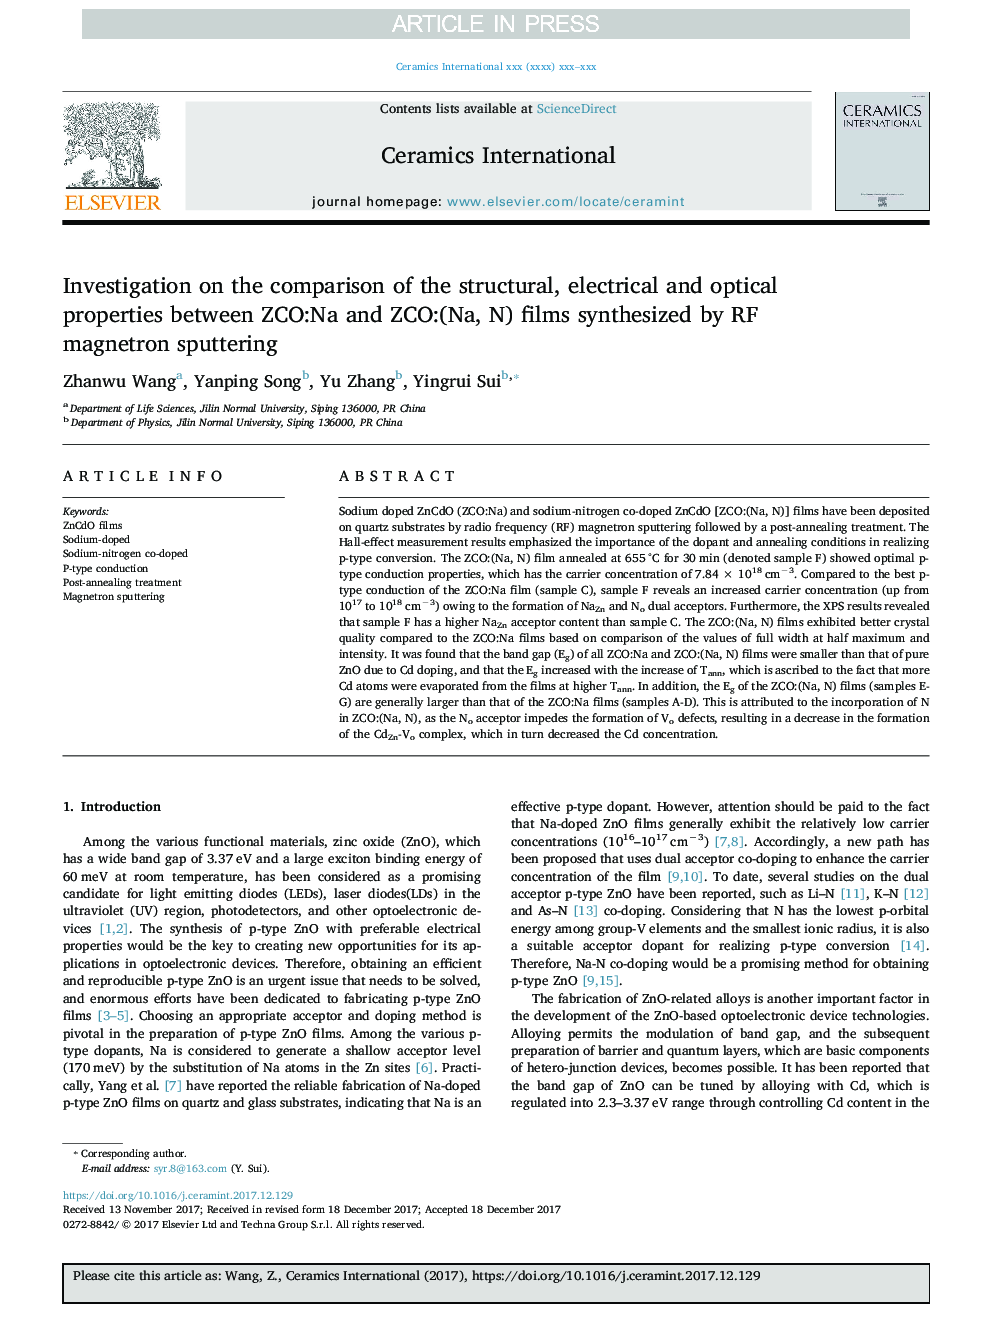 Investigation on the comparison of the structural, electrical and optical properties between ZCO:Na and ZCO:(Na, N) films synthesized by RF magnetron sputtering